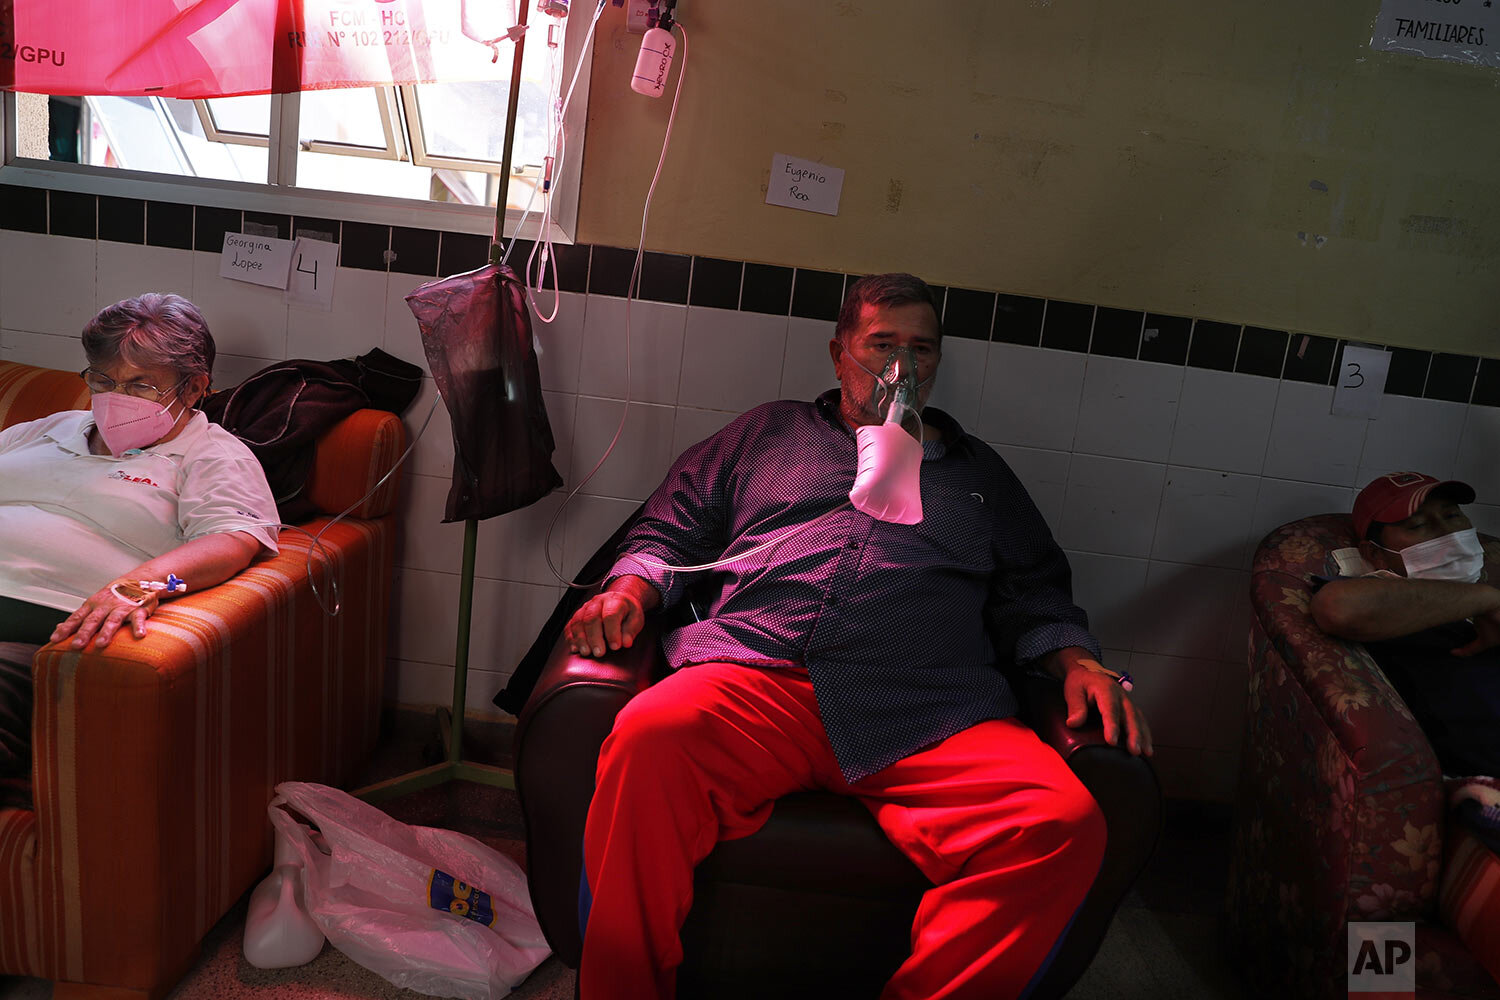  COVID-19 patients sit in armchairs in a hospital hallway due to a lack of available beds at the Clinicas Hospital in San Lorenzo, Paraguay, June 4, 2021. (AP Photo/Jorge Saenz) 